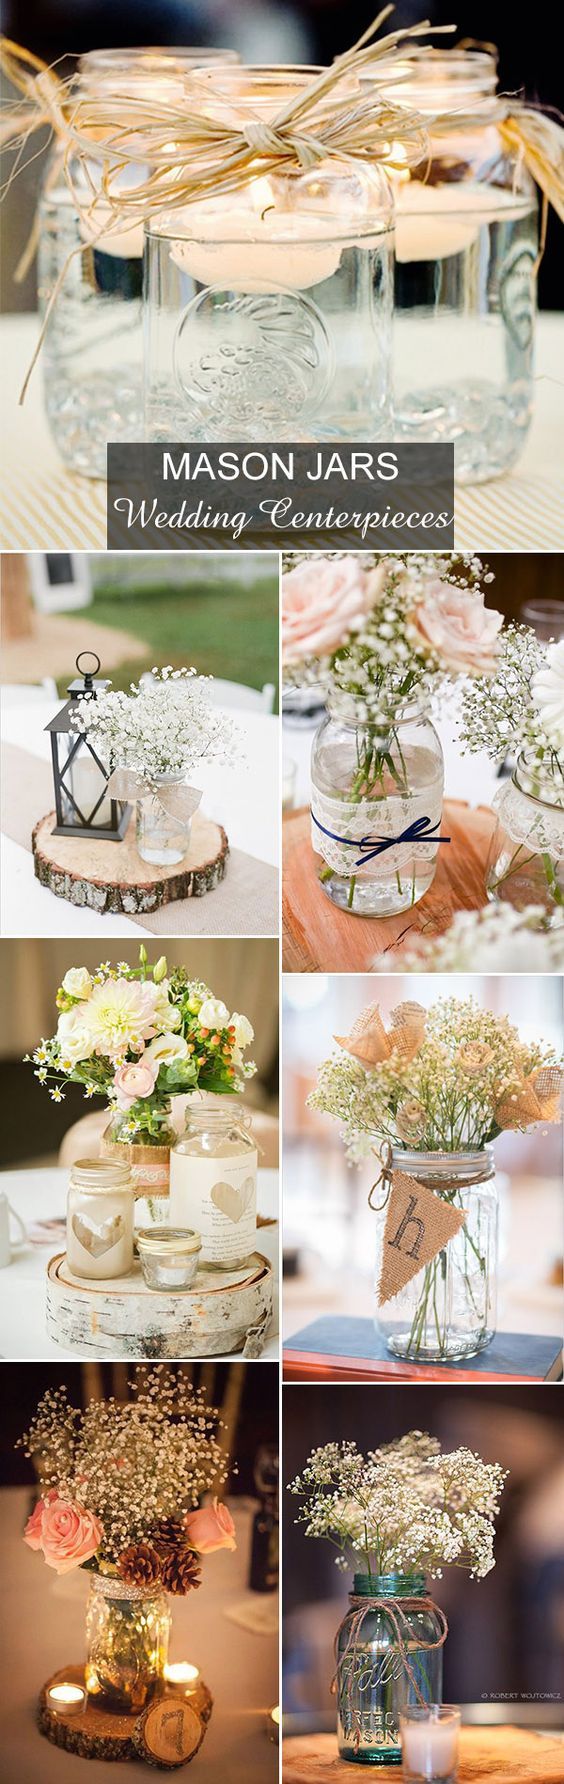 country rustic mason jars inspired wedding centerpieces ideas: